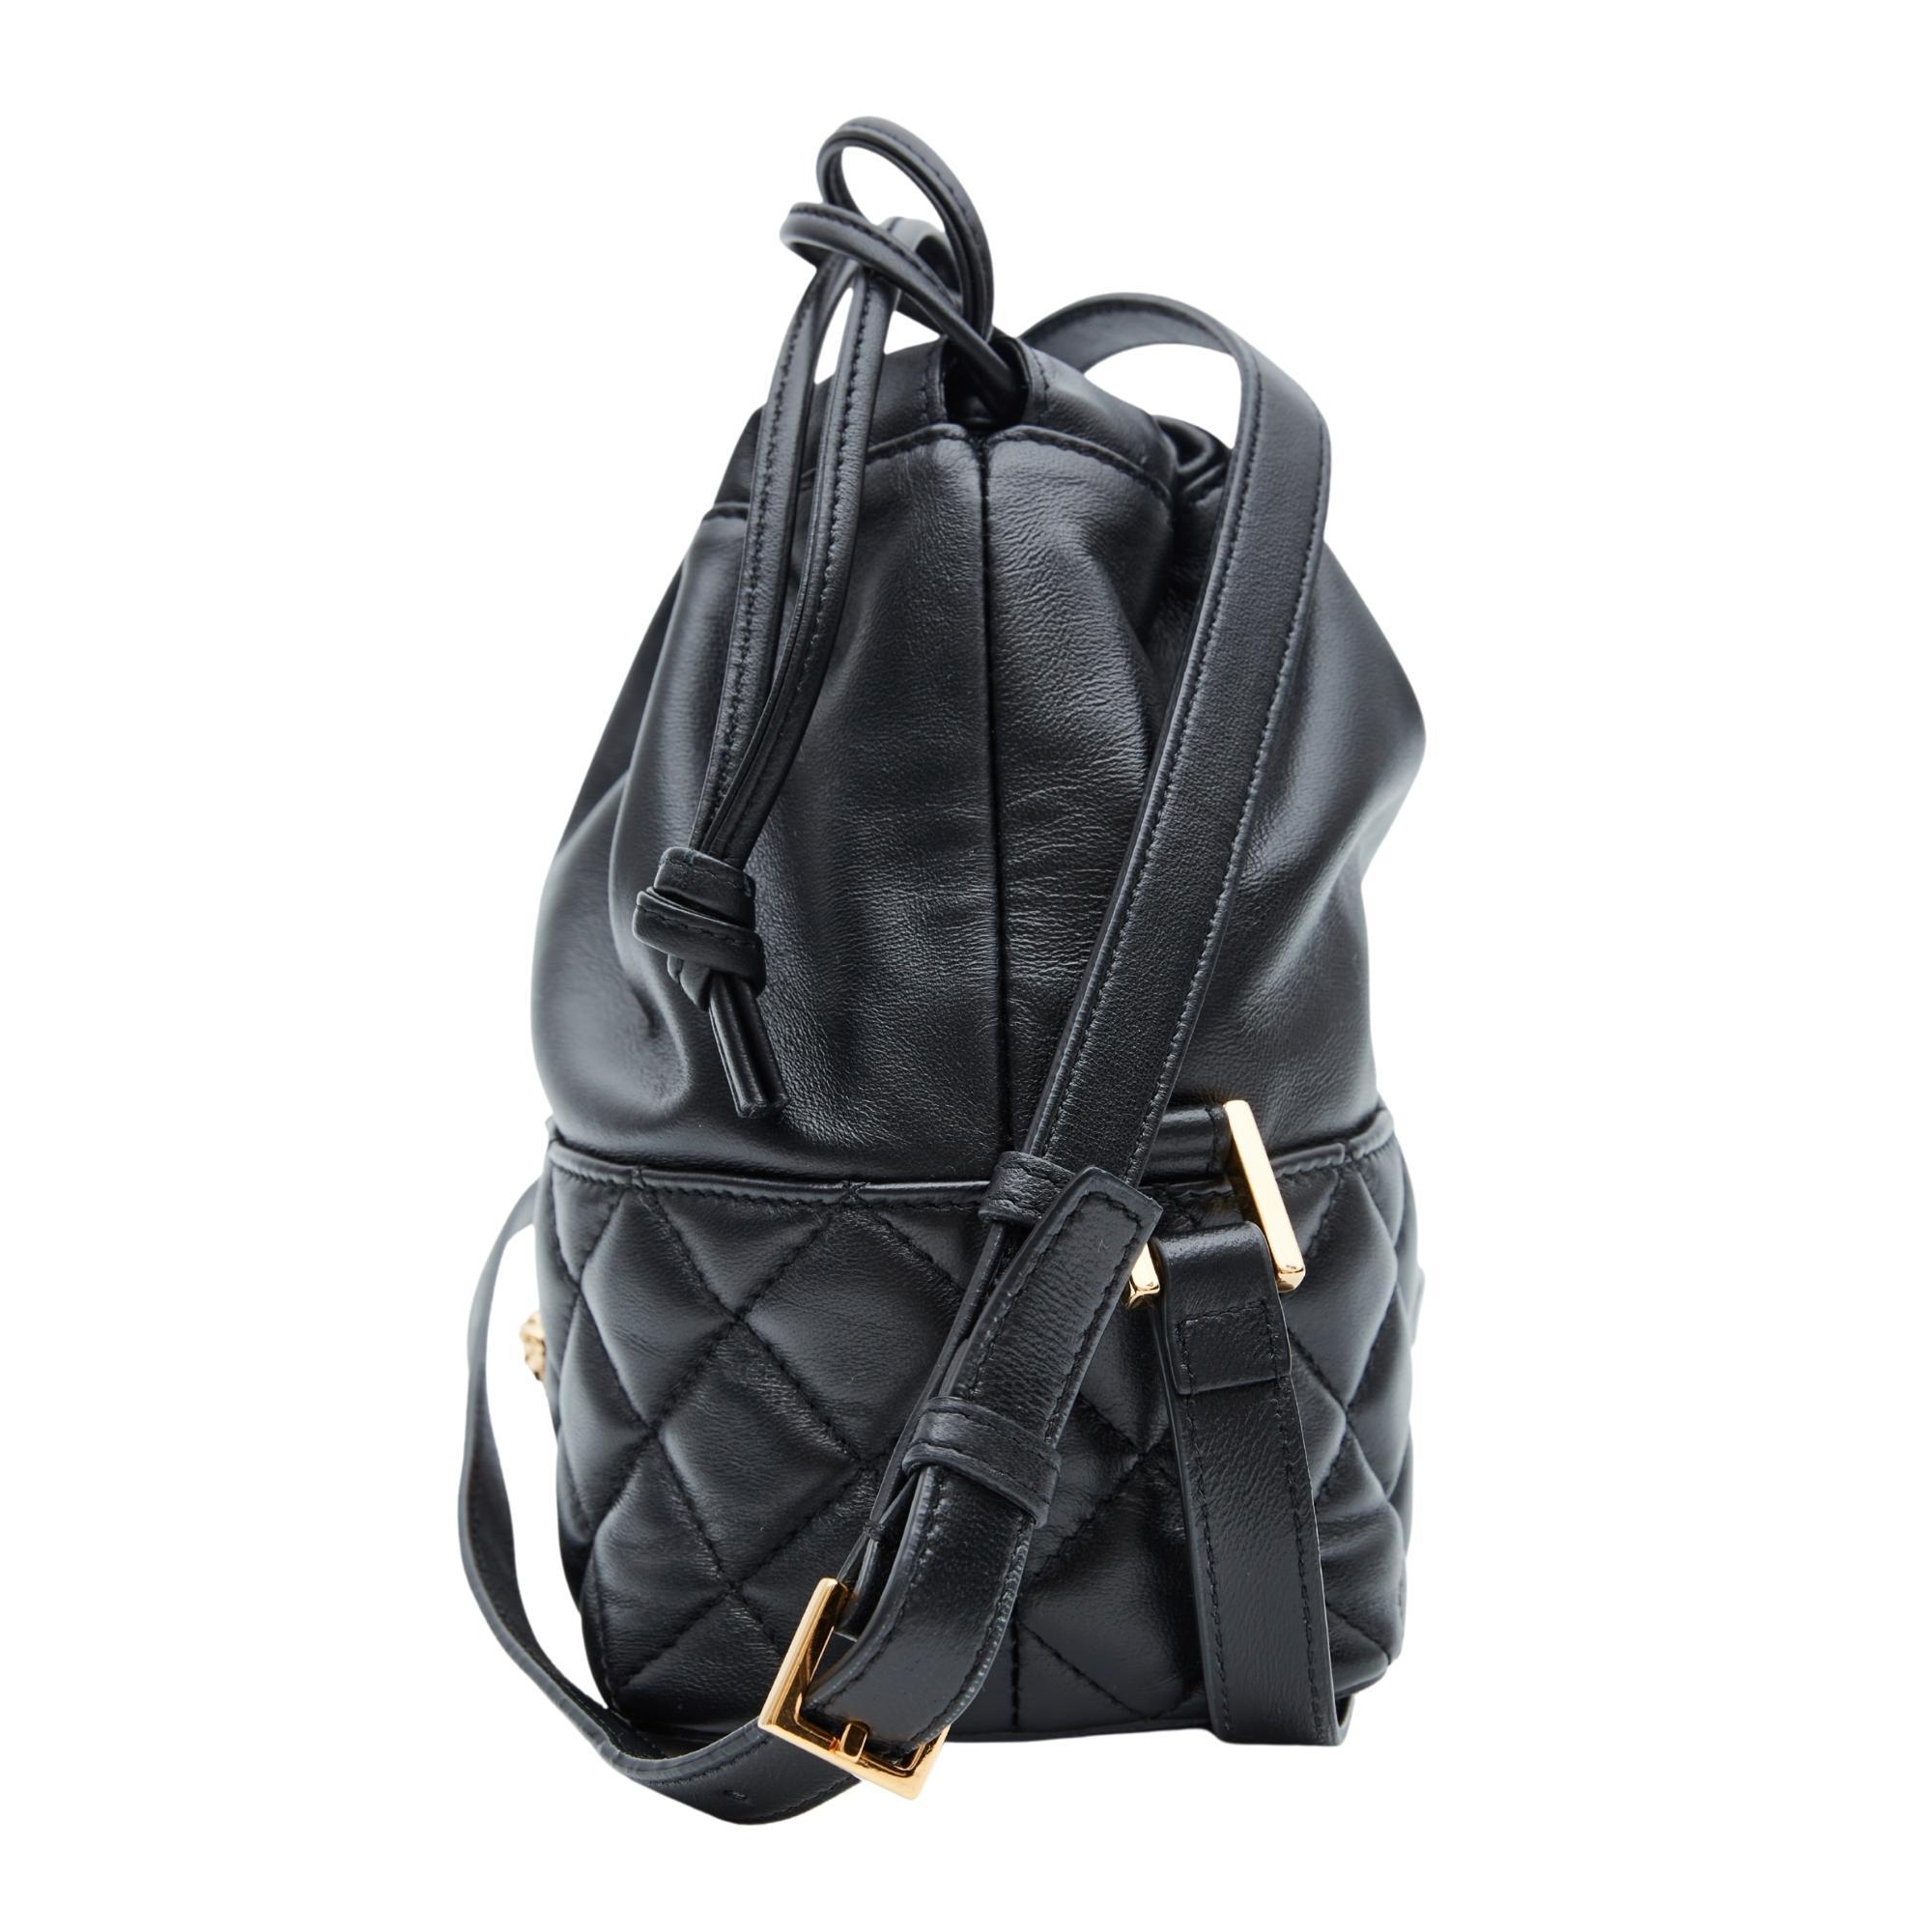 This luxurious bag is crafted of Versace smooth calfskin nappa leather in black. The bag features a leather crossbody strap, gold hardware, quilted leather bottom, smooth leather upper and an open top with drawstring closure. The handbag opens to a